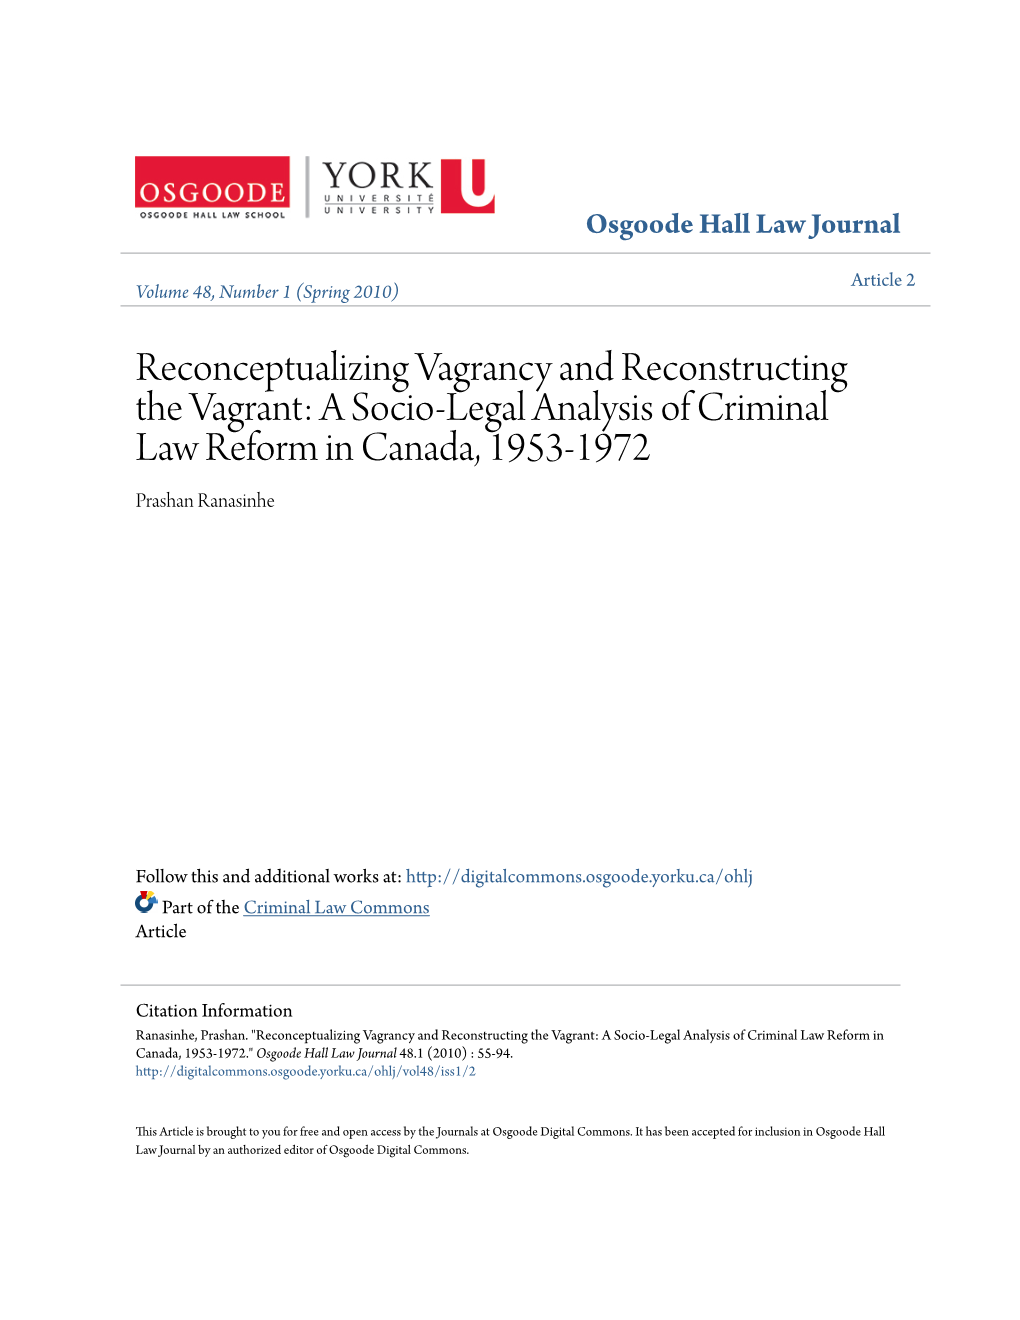 Reconceptualizing Vagrancy and Reconstructing the Vagrant: a Socio-Legal Analysis of Criminal Law Reform in Canada, 1953-1972 Prashan Ranasinhe